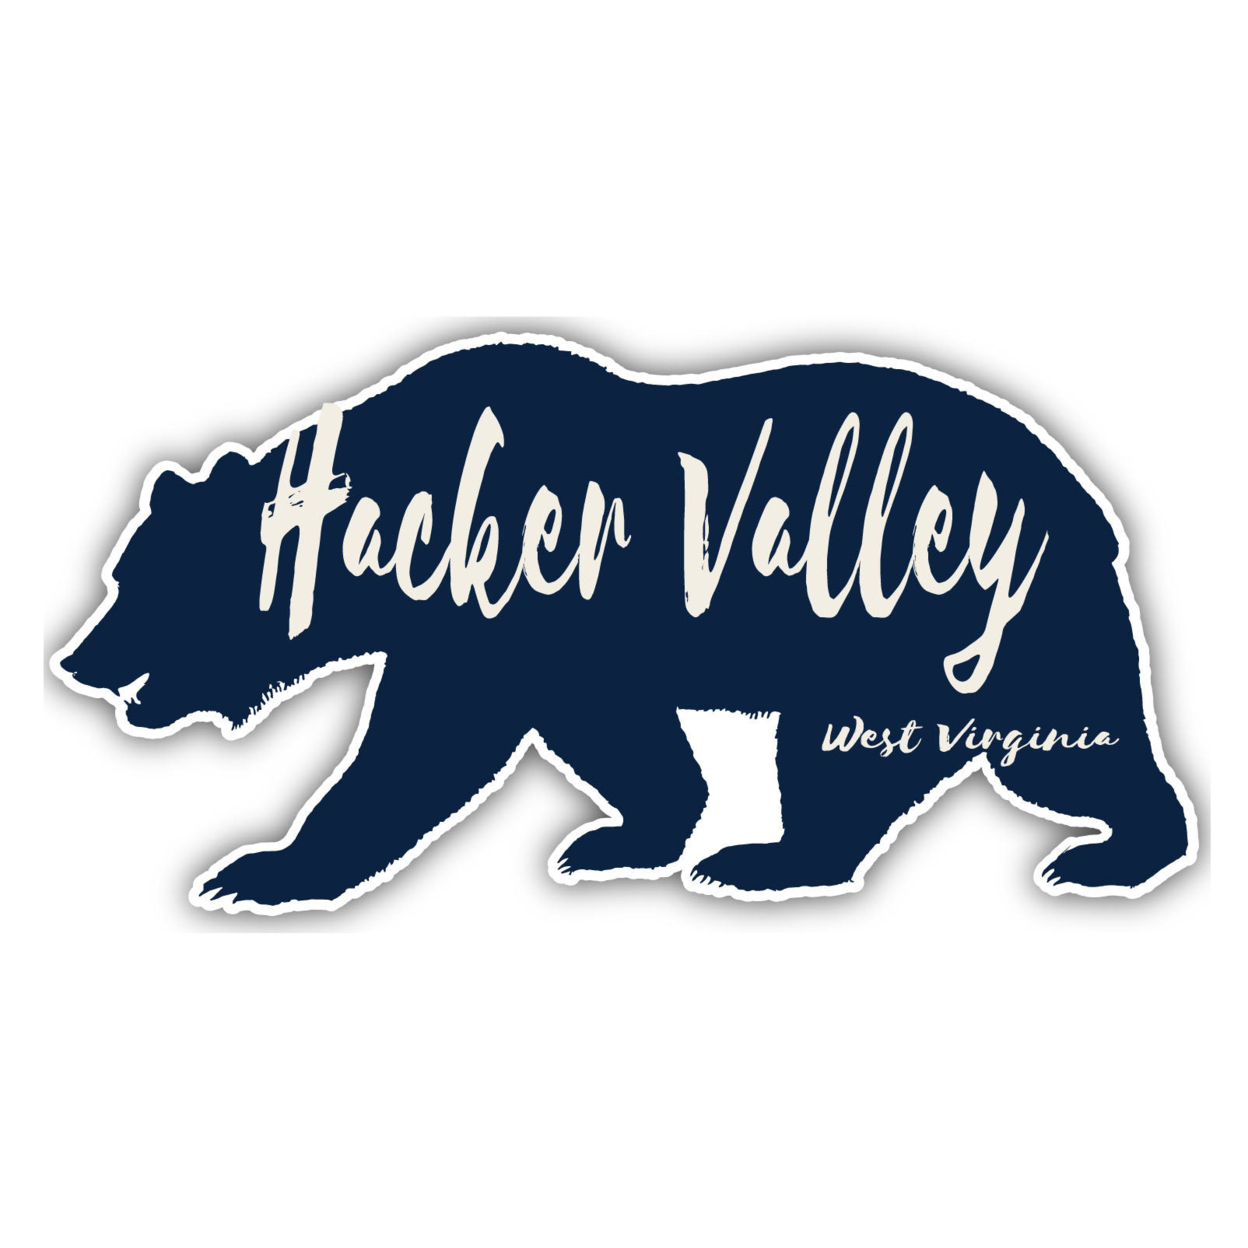 Hacker Valley West Virginia Souvenir Decorative Stickers (Choose Theme And Size) - Single Unit, 2-Inch, Great Outdoors